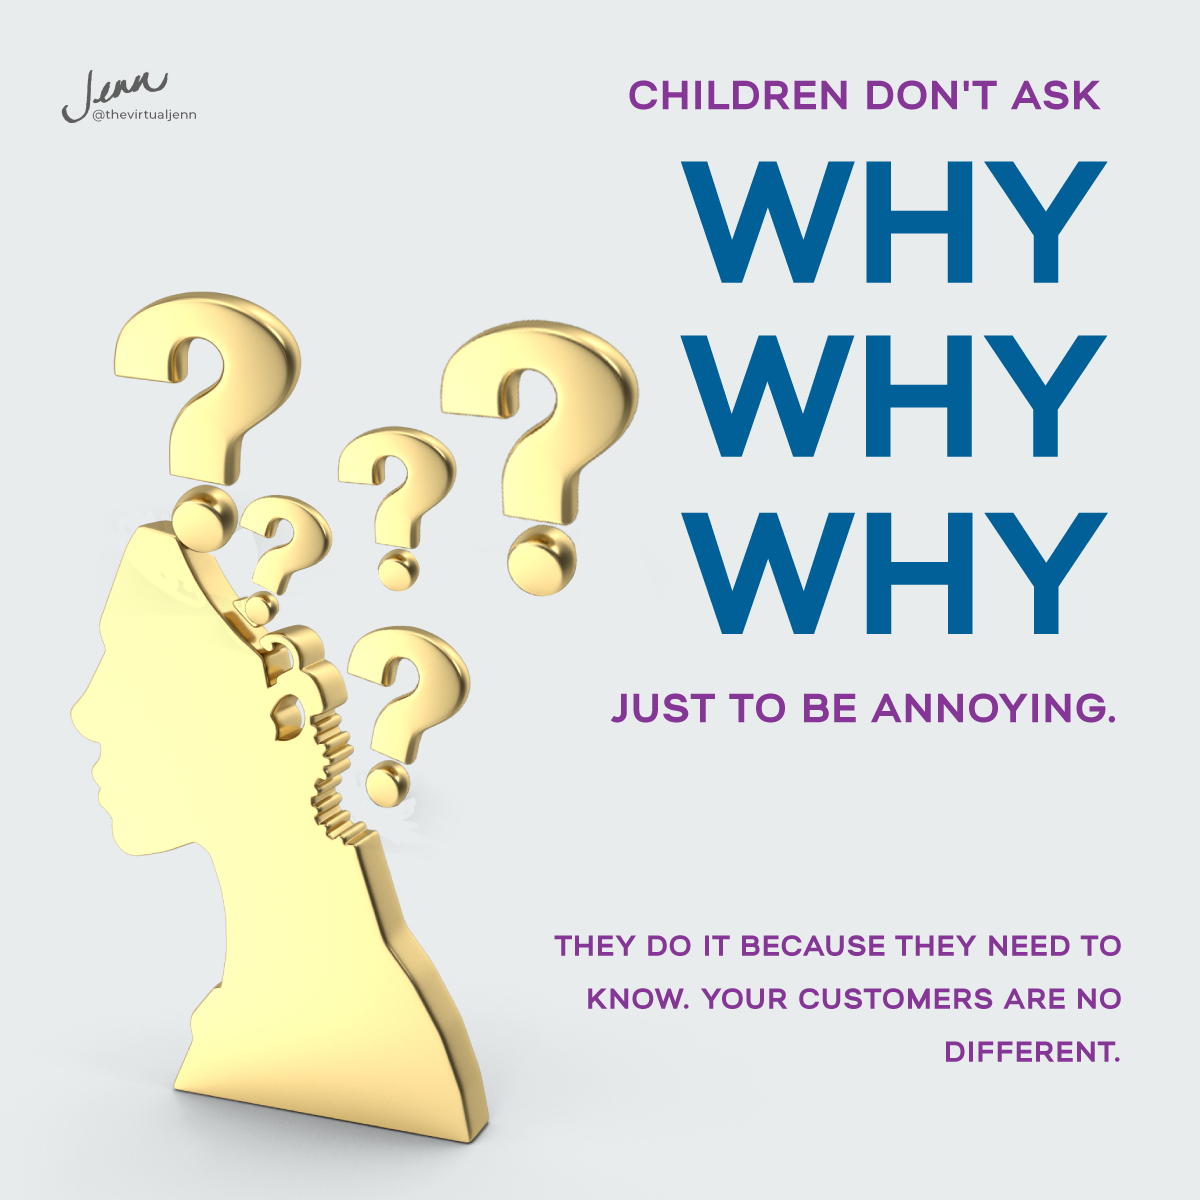 Children don't ask WHY WHY WHY just to be annoying. They do it because they need to know. Your customers are no different.
Jenn Neal on What is the best content marketing strategy for 2021?